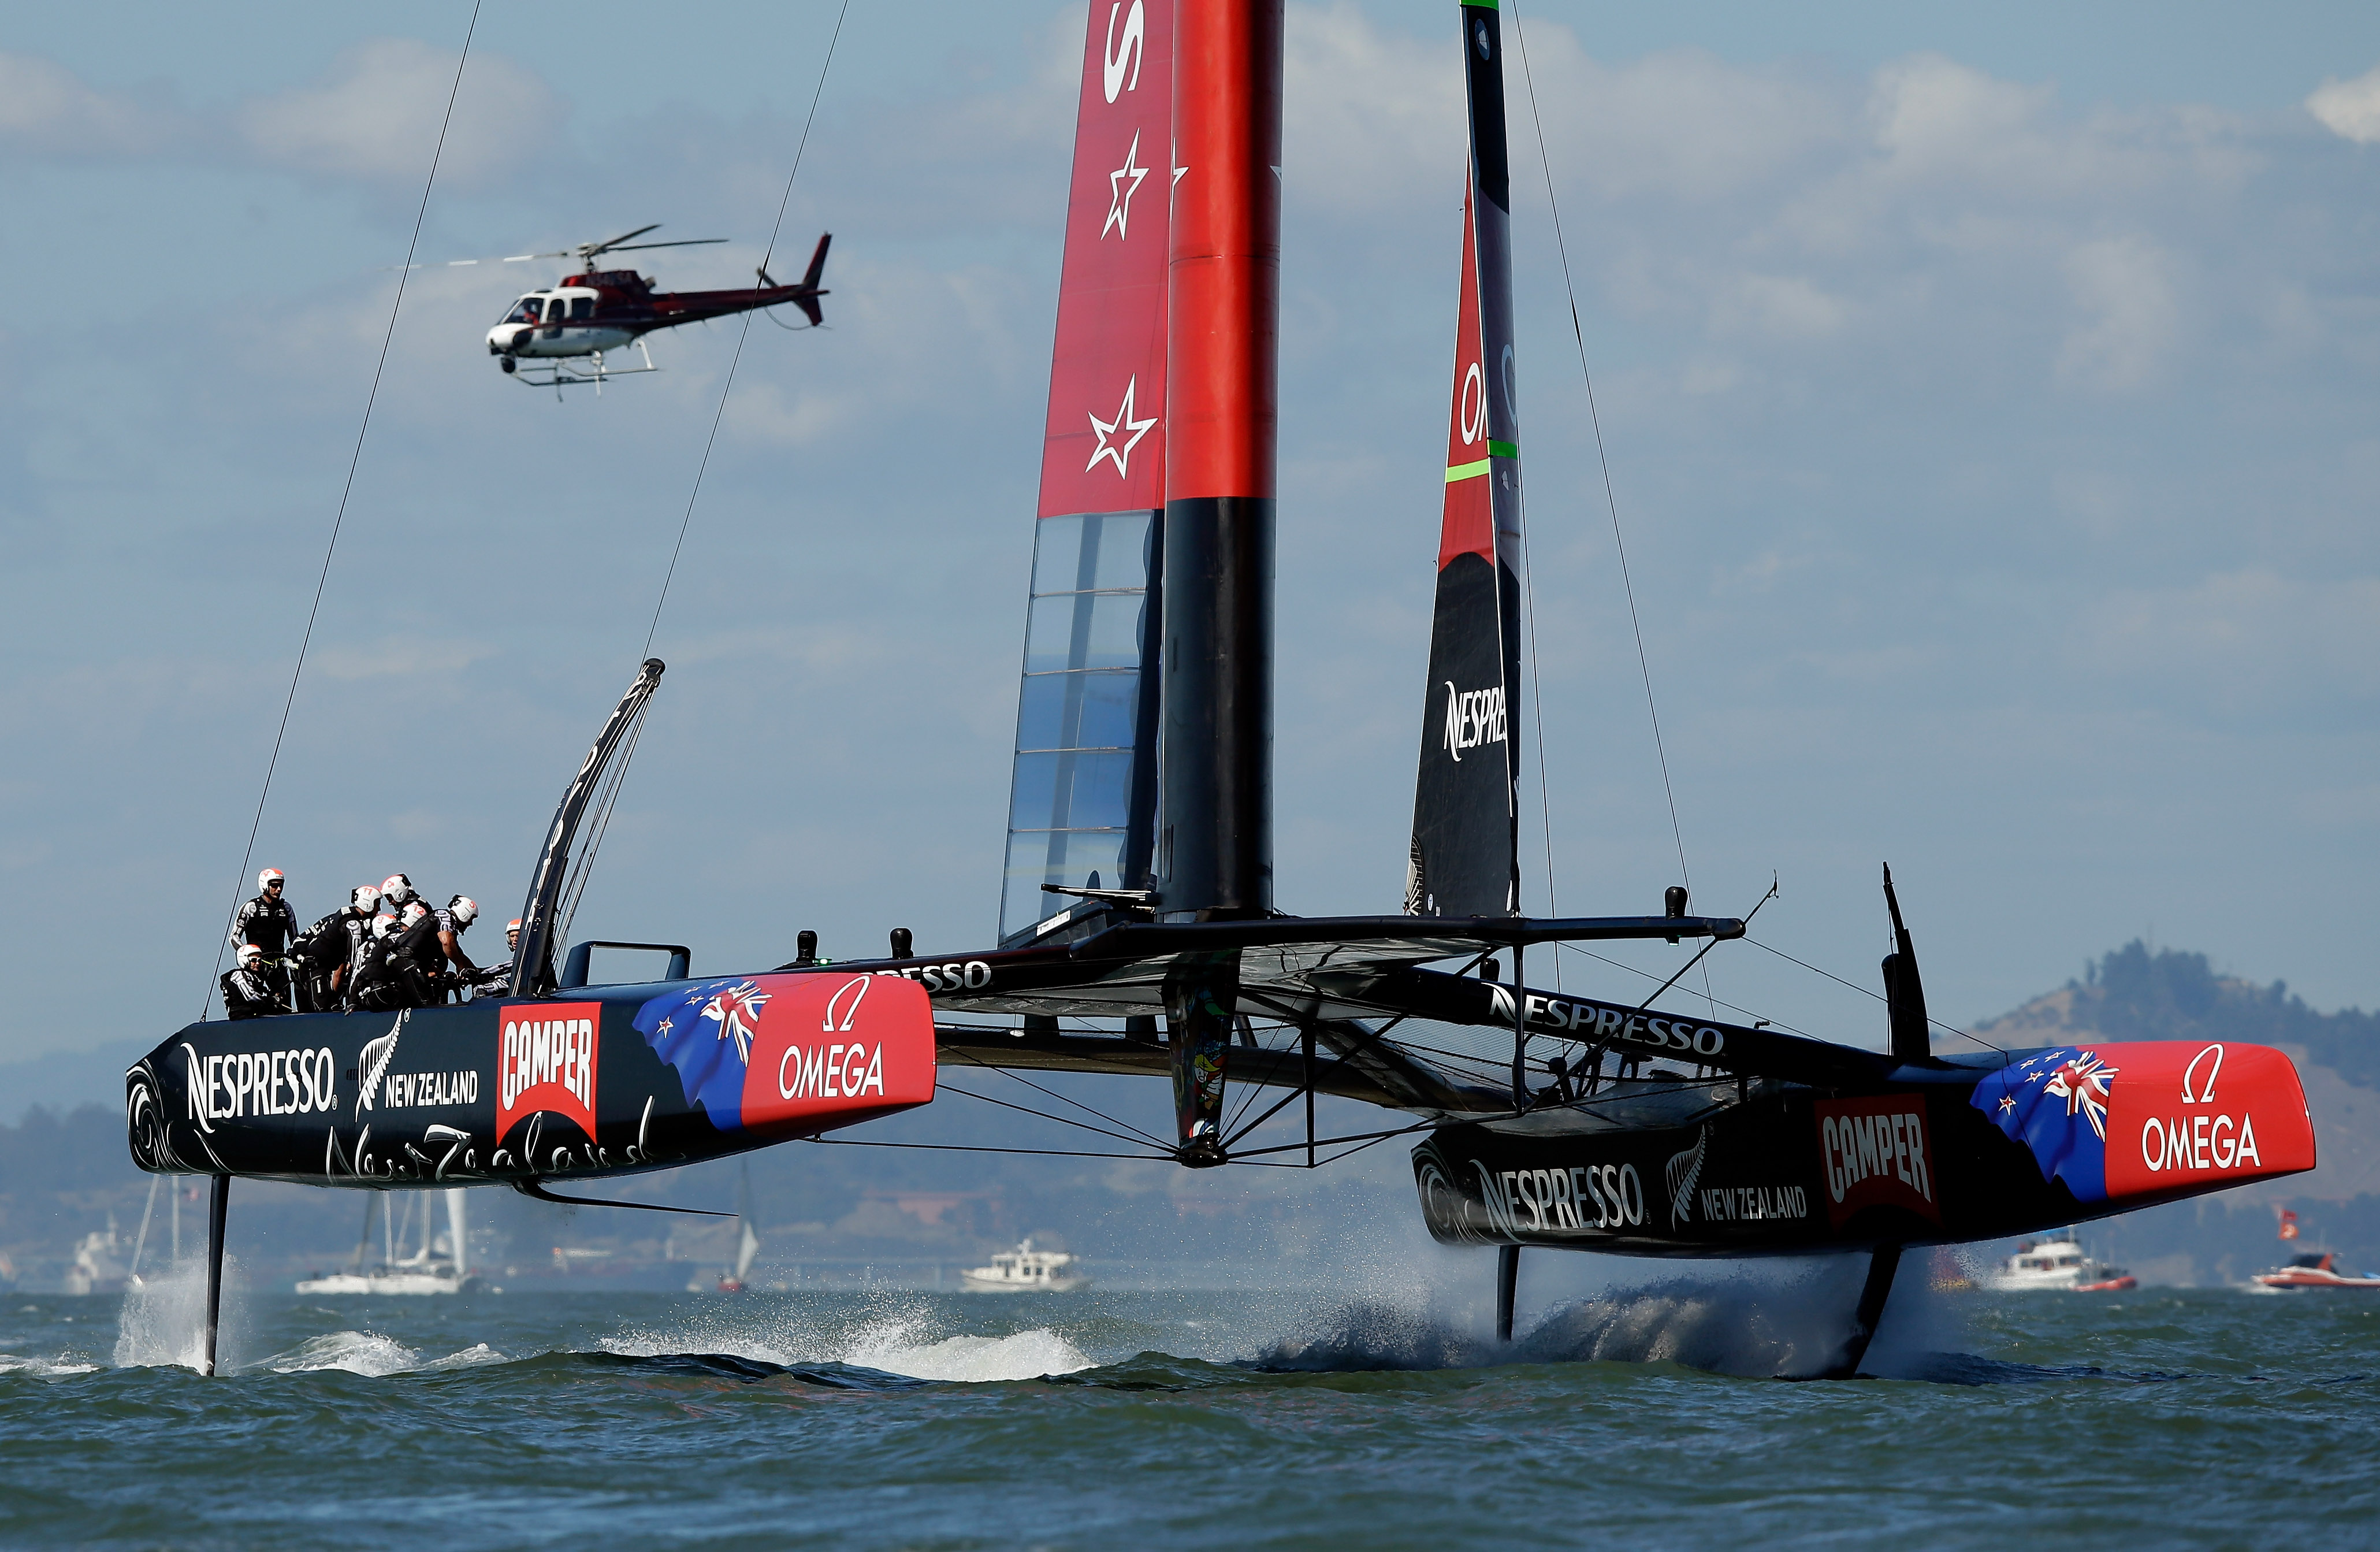 Emirates Team New Zealand skippered by Dean Barker in action against Oracle Team USA skippered by James Spithill during race 15 of the America's Cup Finals on September 22, 2013 in San Francisco, California. Oracle Team USA won both race 14 and 15 today. (credit: Ezra Shaw/Getty Images)